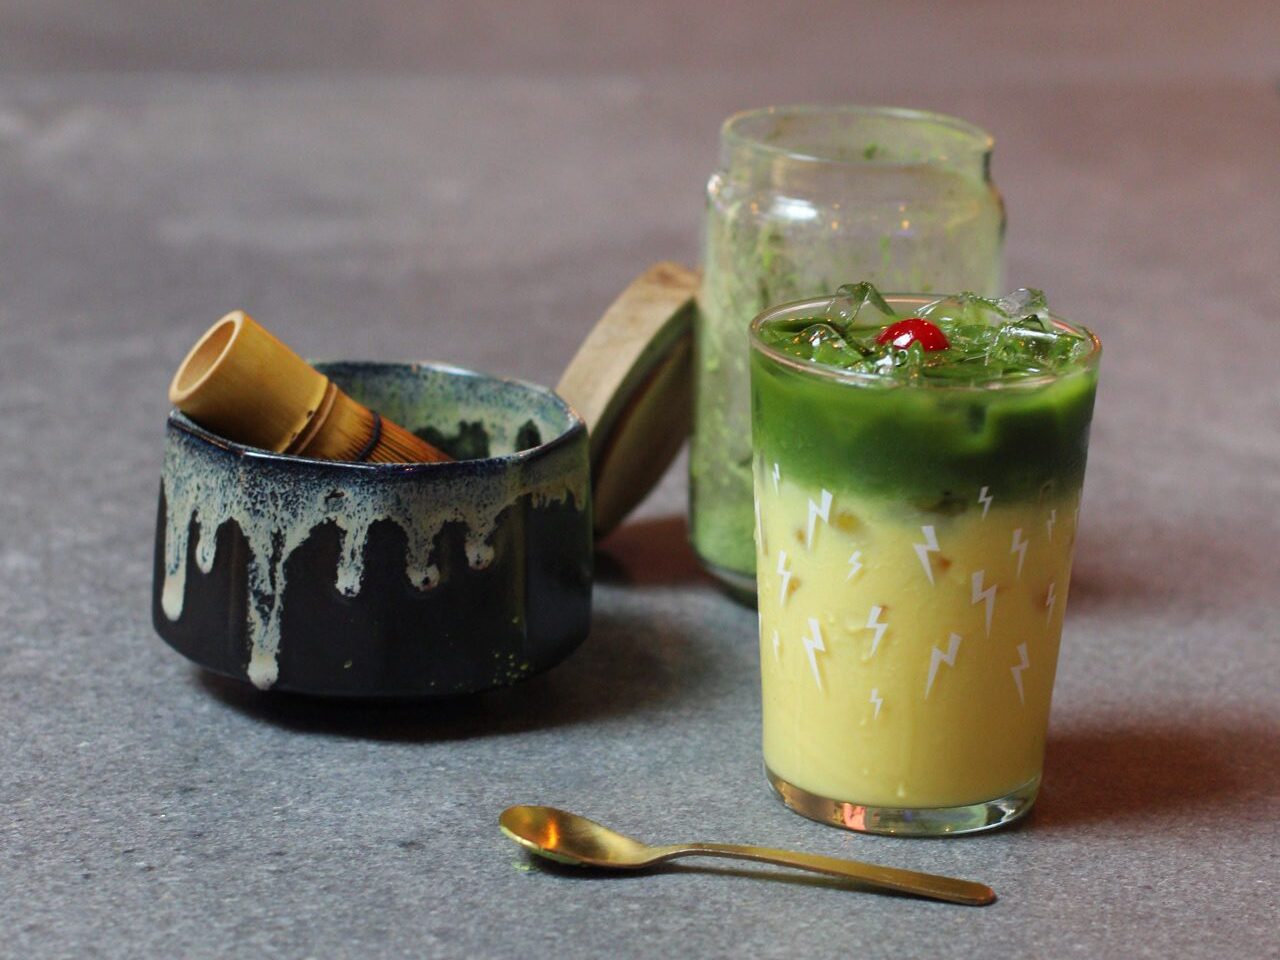 A colorful Pineapple Upside Down Matcha from Resident Culture in Charlotte.